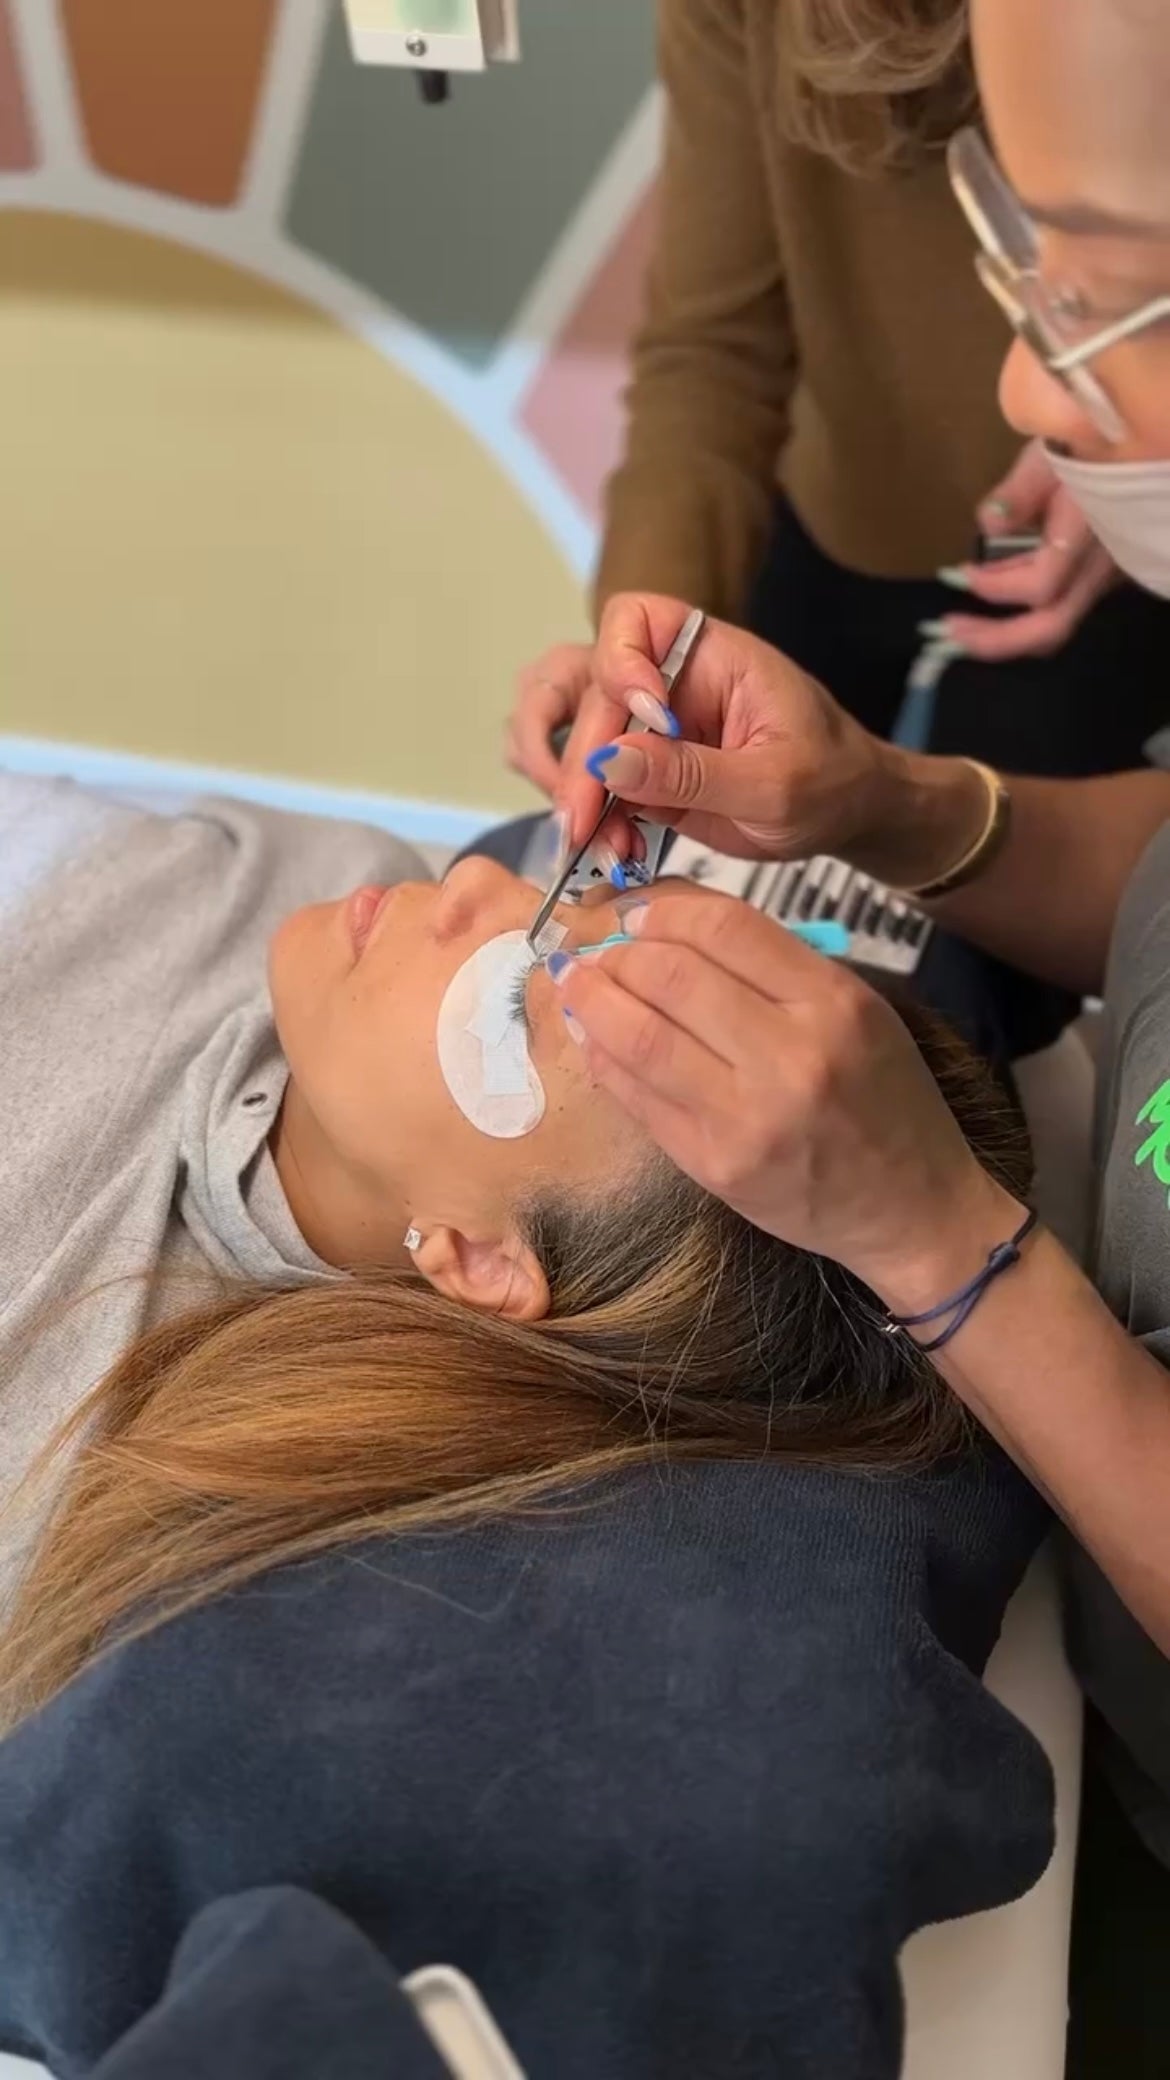 The Lash Den Los Angeles: eyelash extensions, lash lifting, brow lamination, and training and education for lash artists, estheticians, and cosmetologists